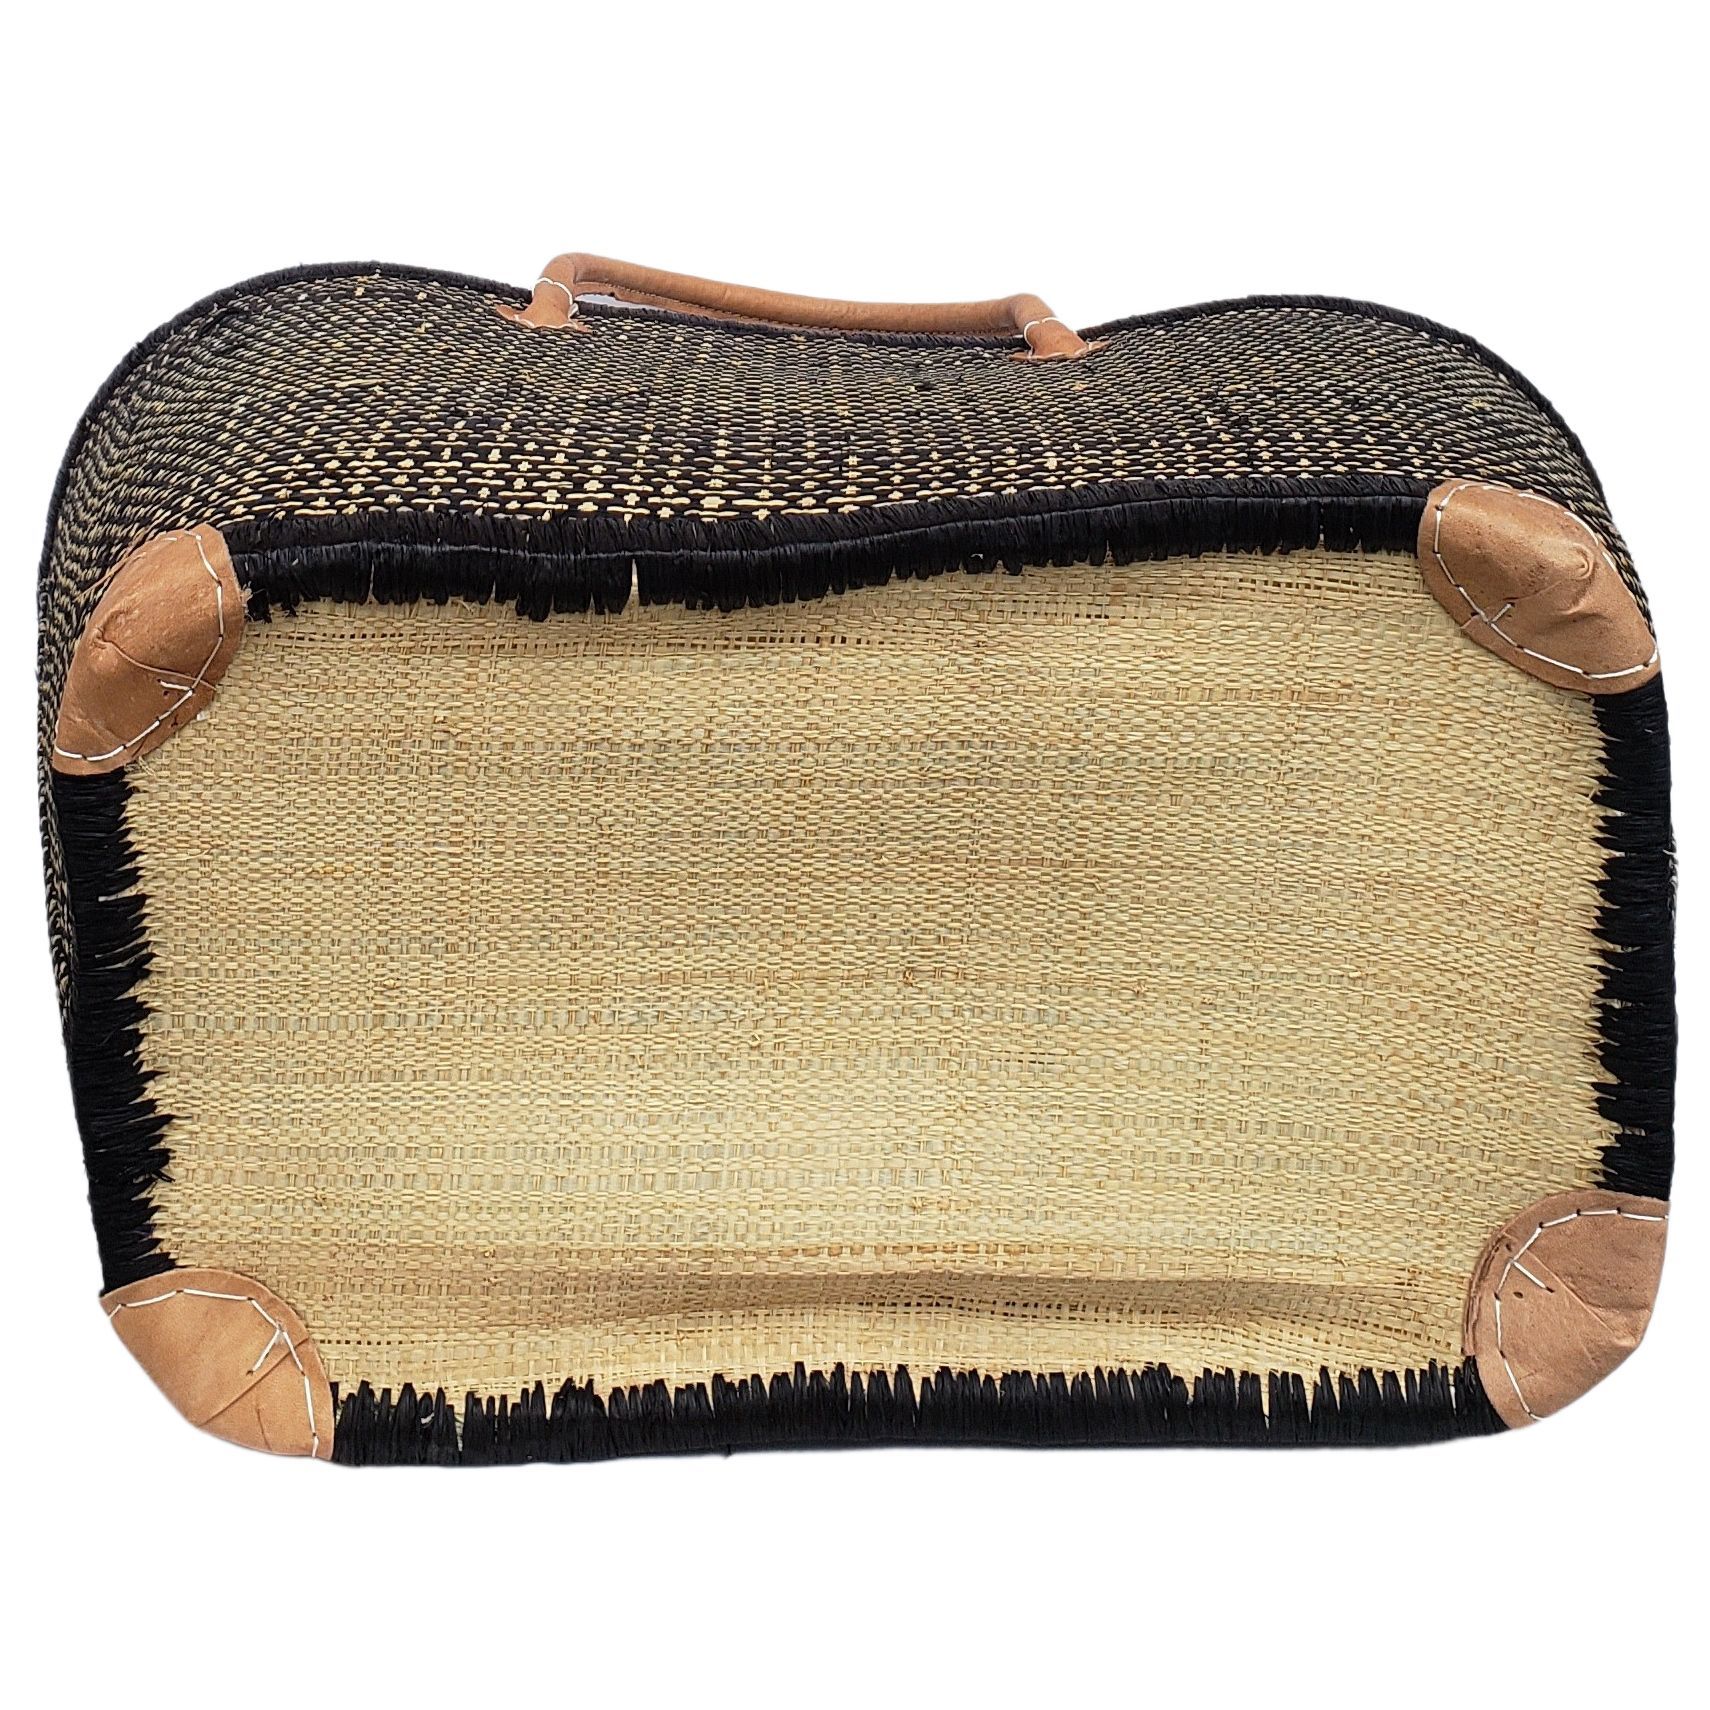 26 of 59: Adjanie: Authentic Madagascar Raffia and Leather Tote Bag (Black and Natural)